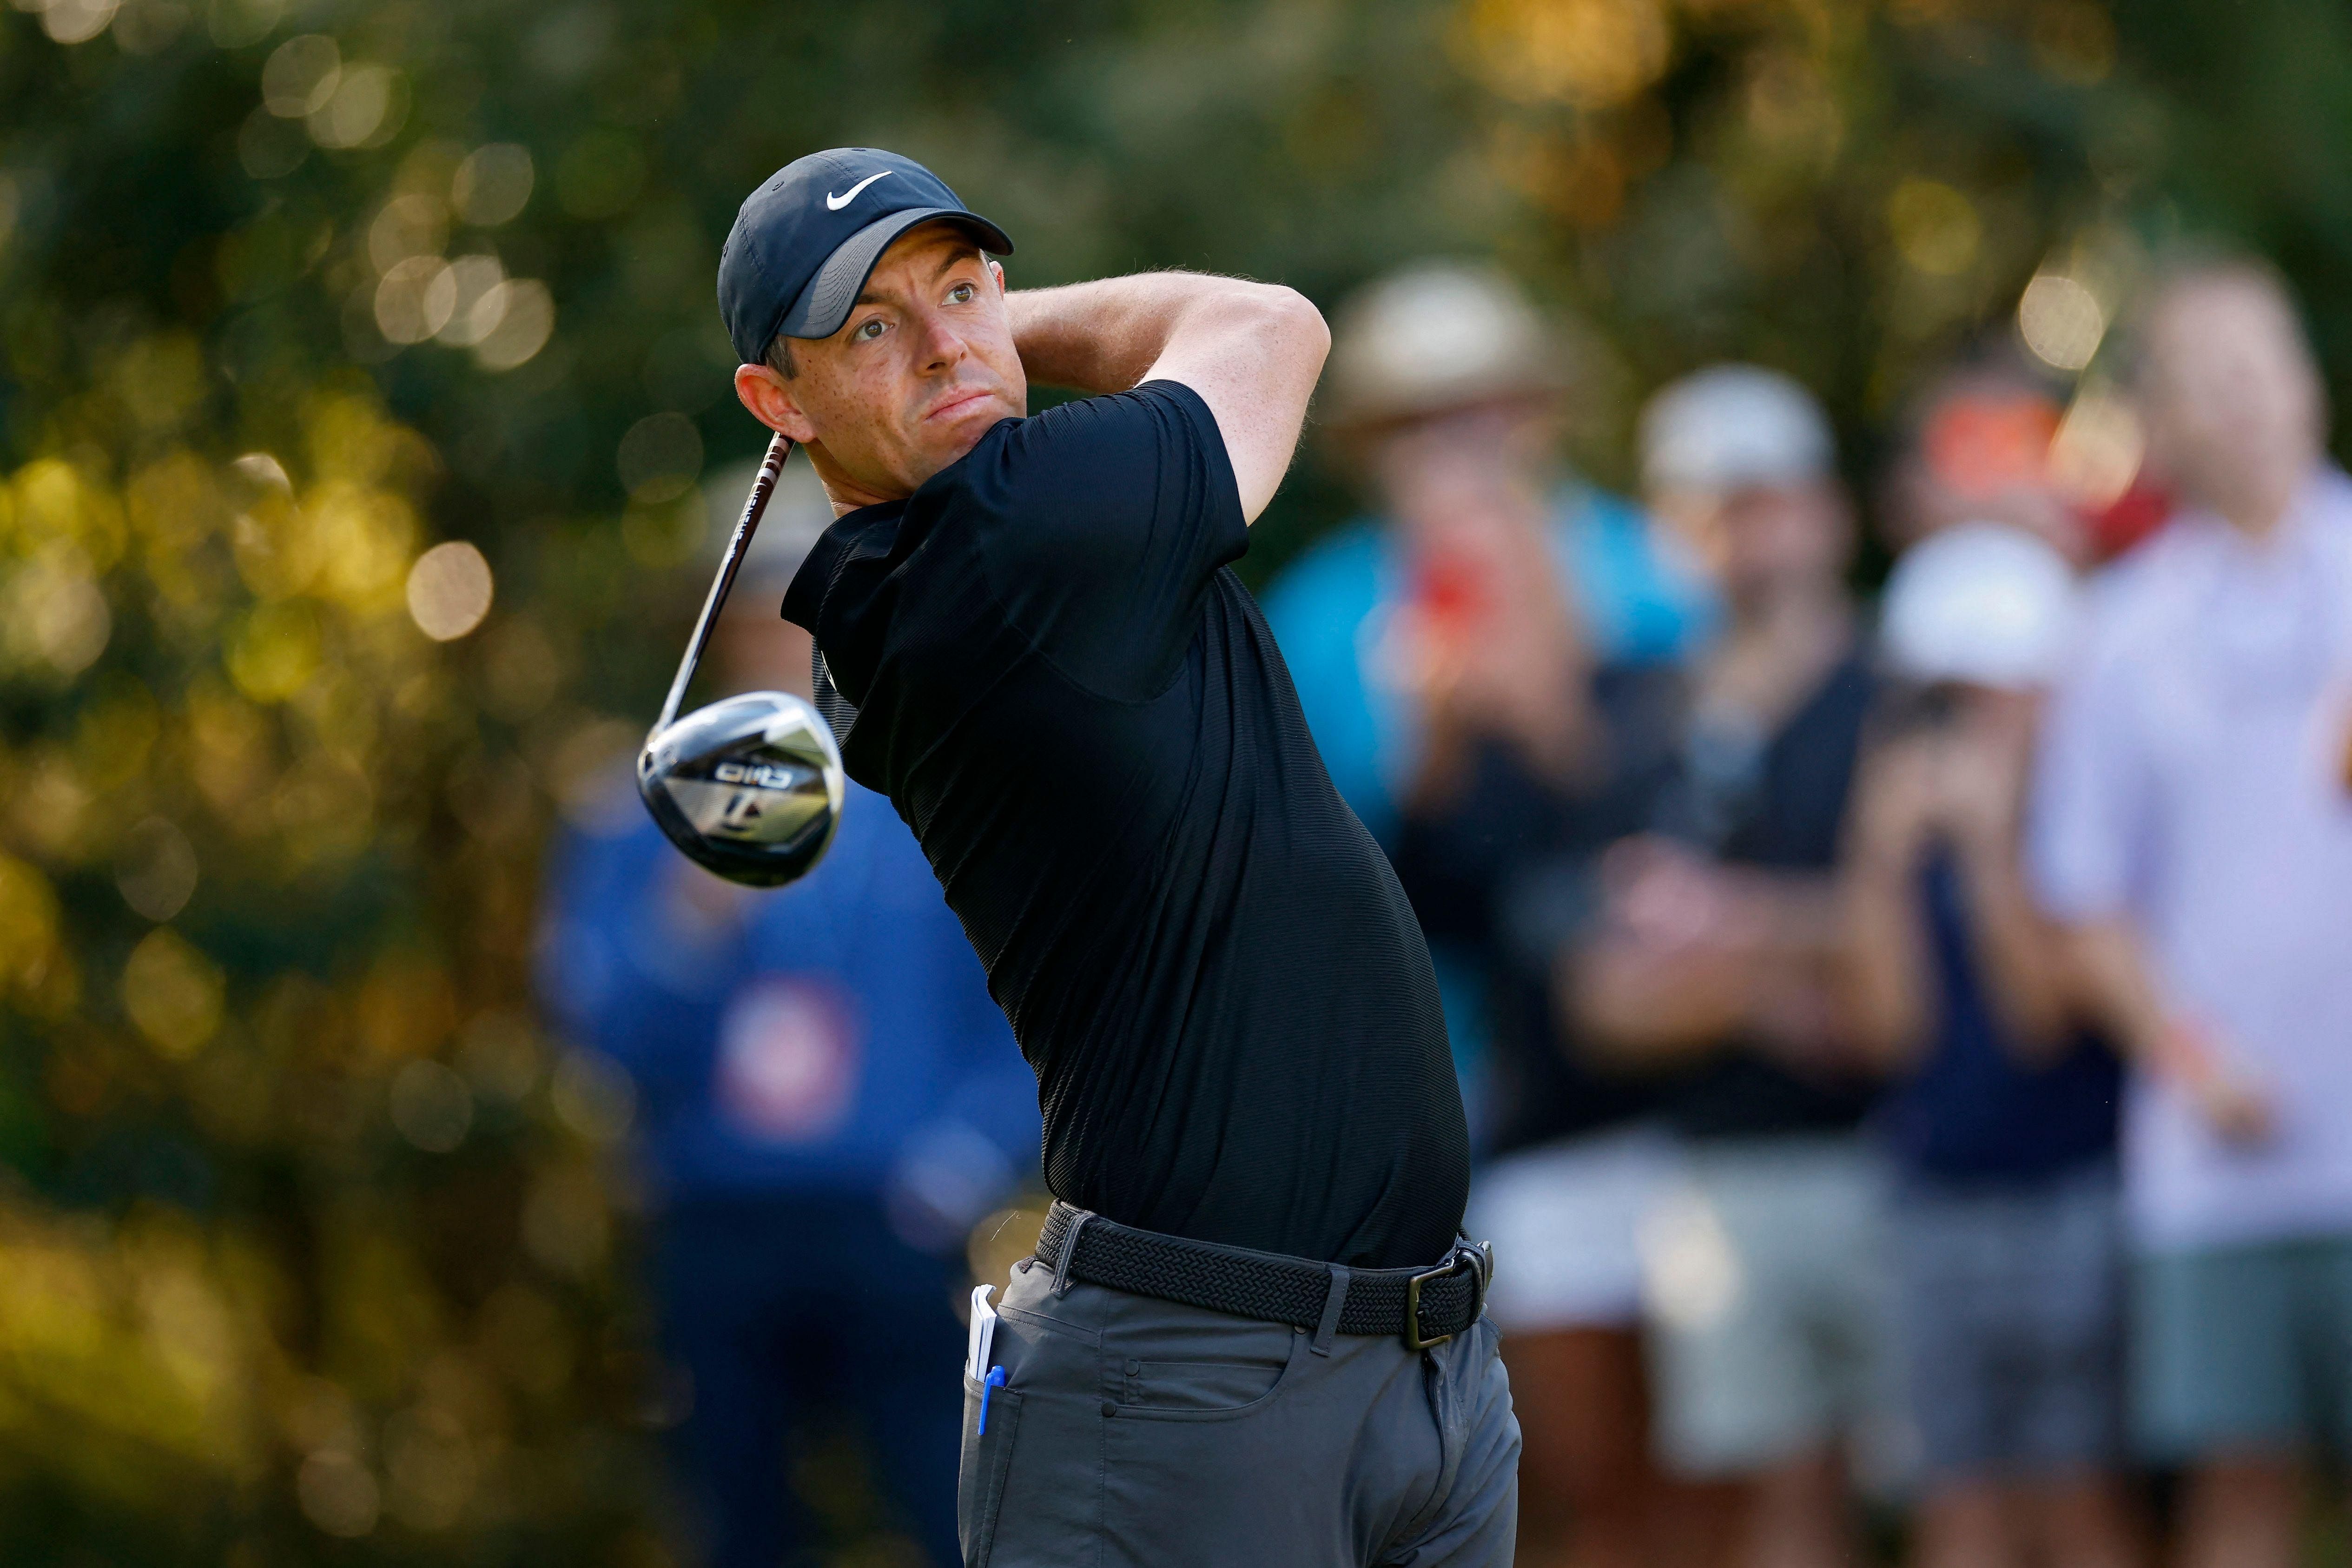 Rory McIlroy, Xander Schauffele share early lead at Players Championship